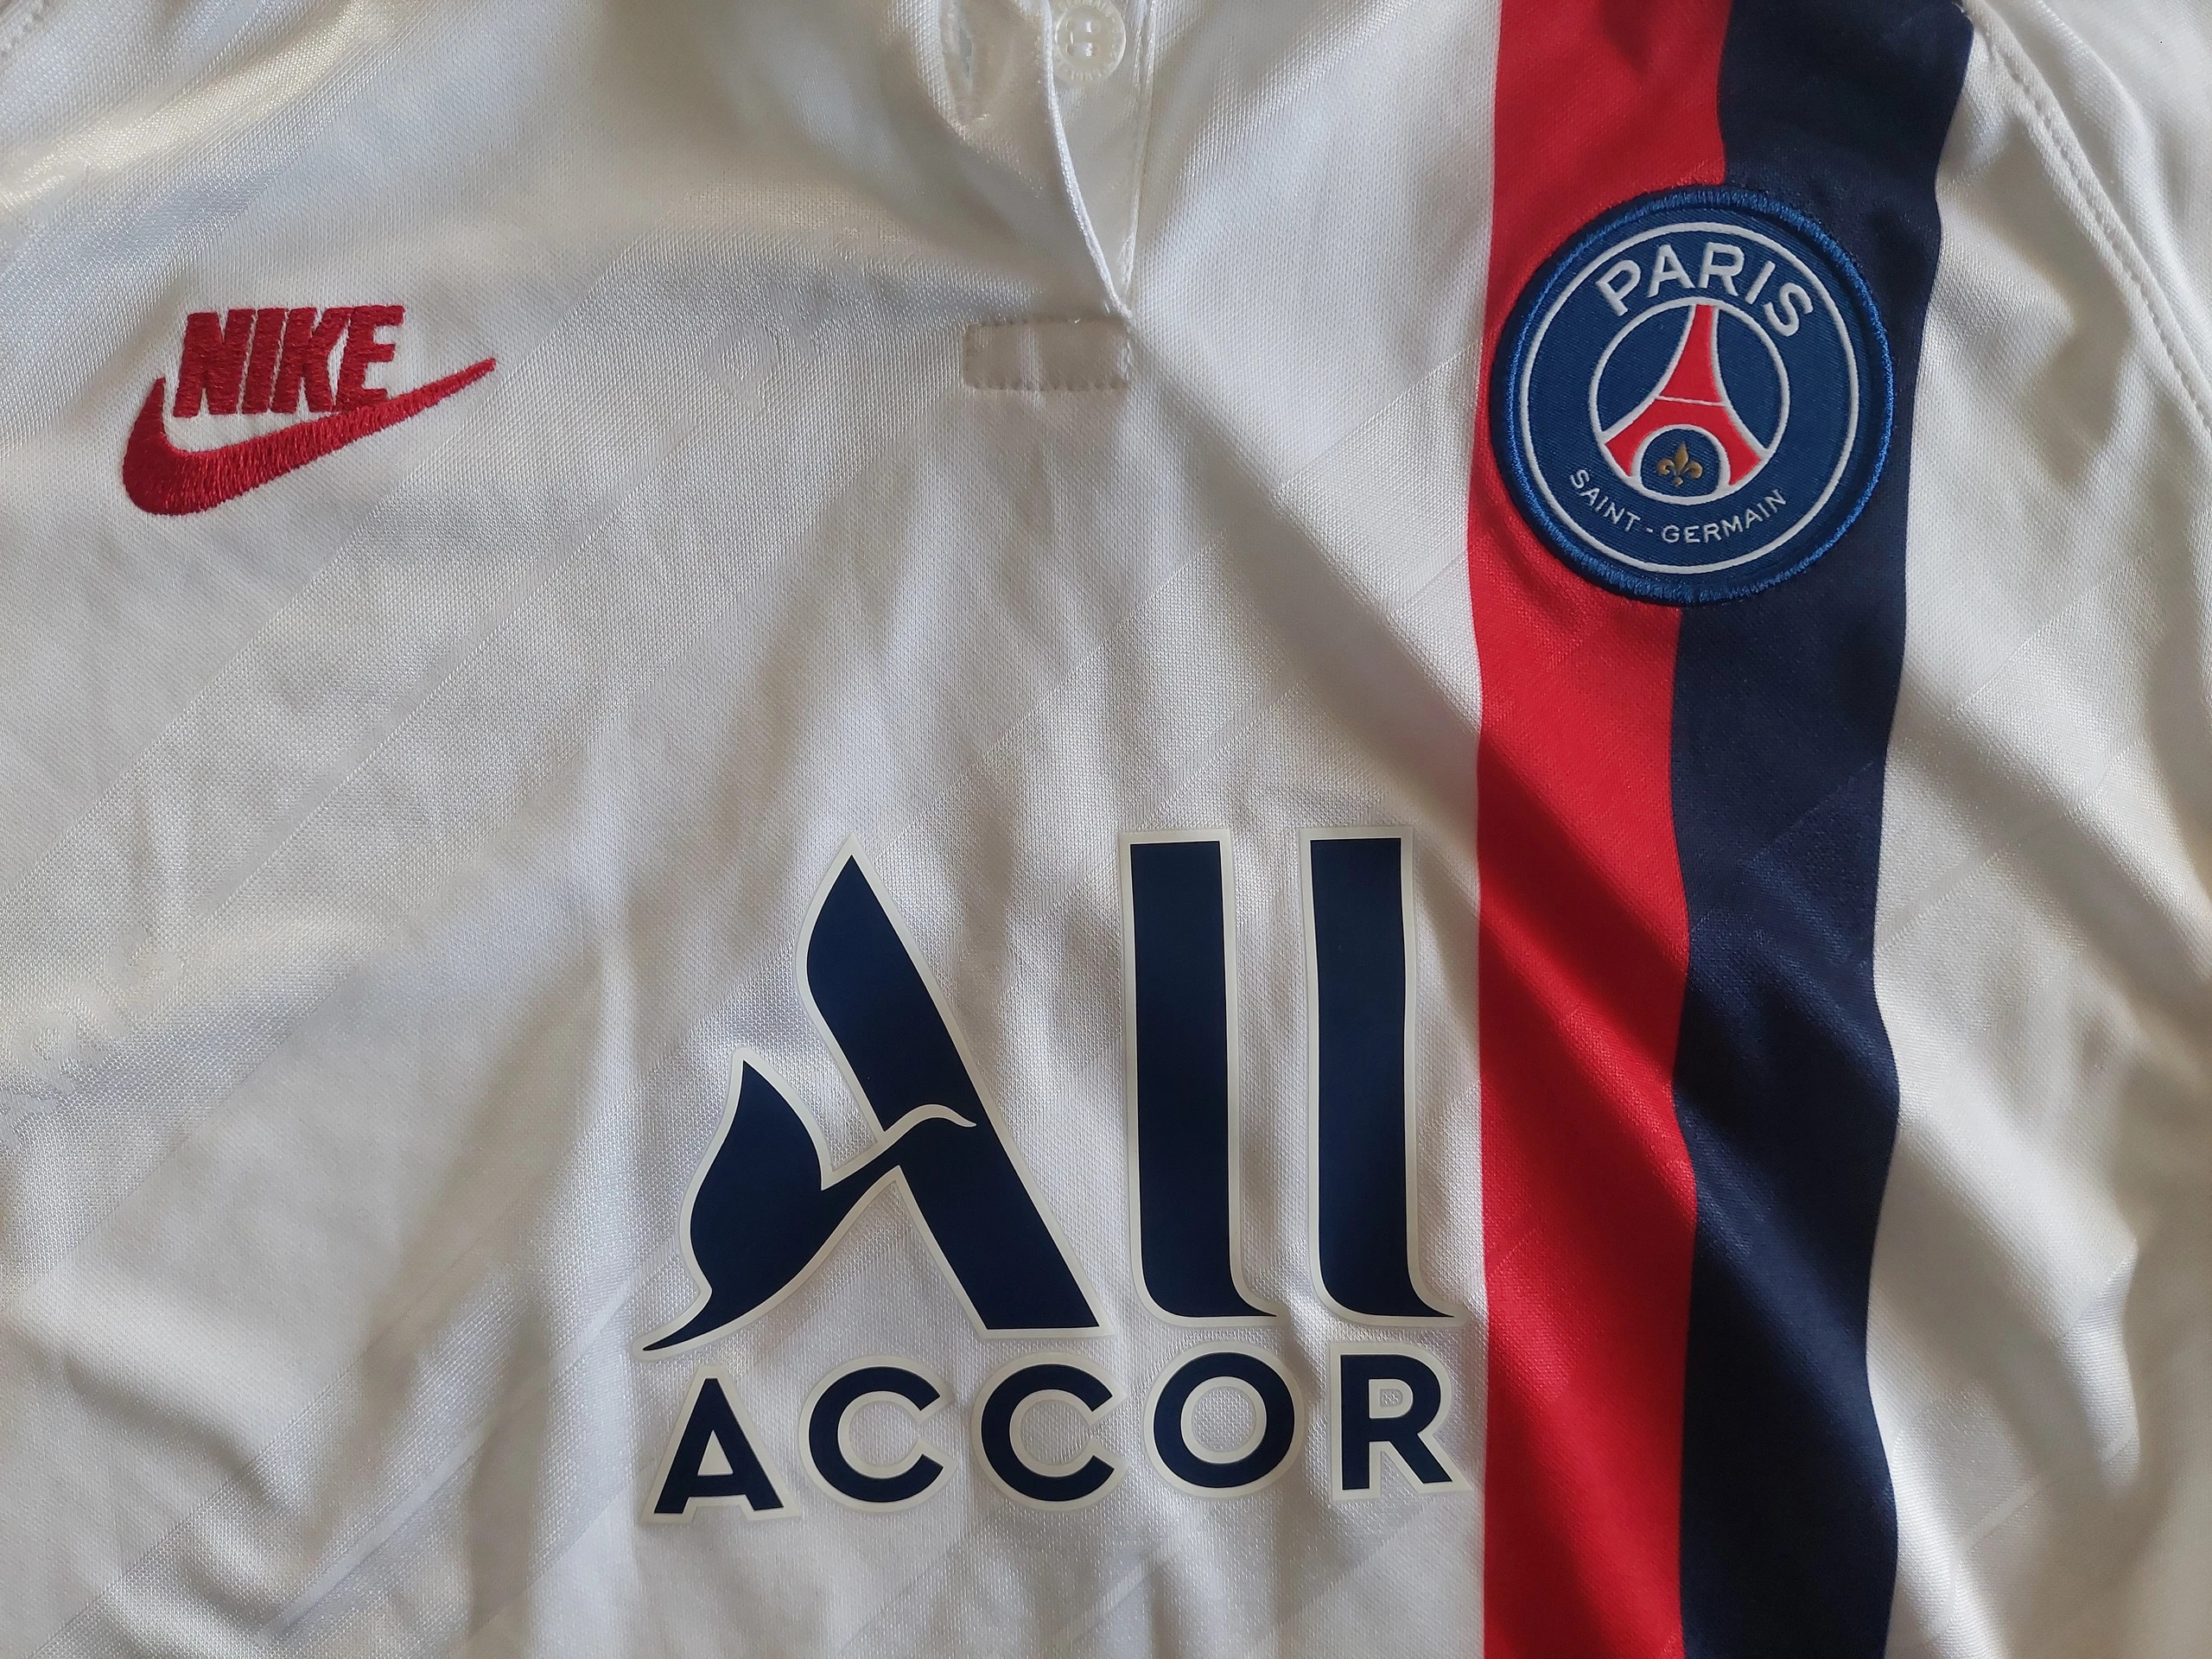 MAILLOT homme NIKE PSG THIRD 2019 - 2020